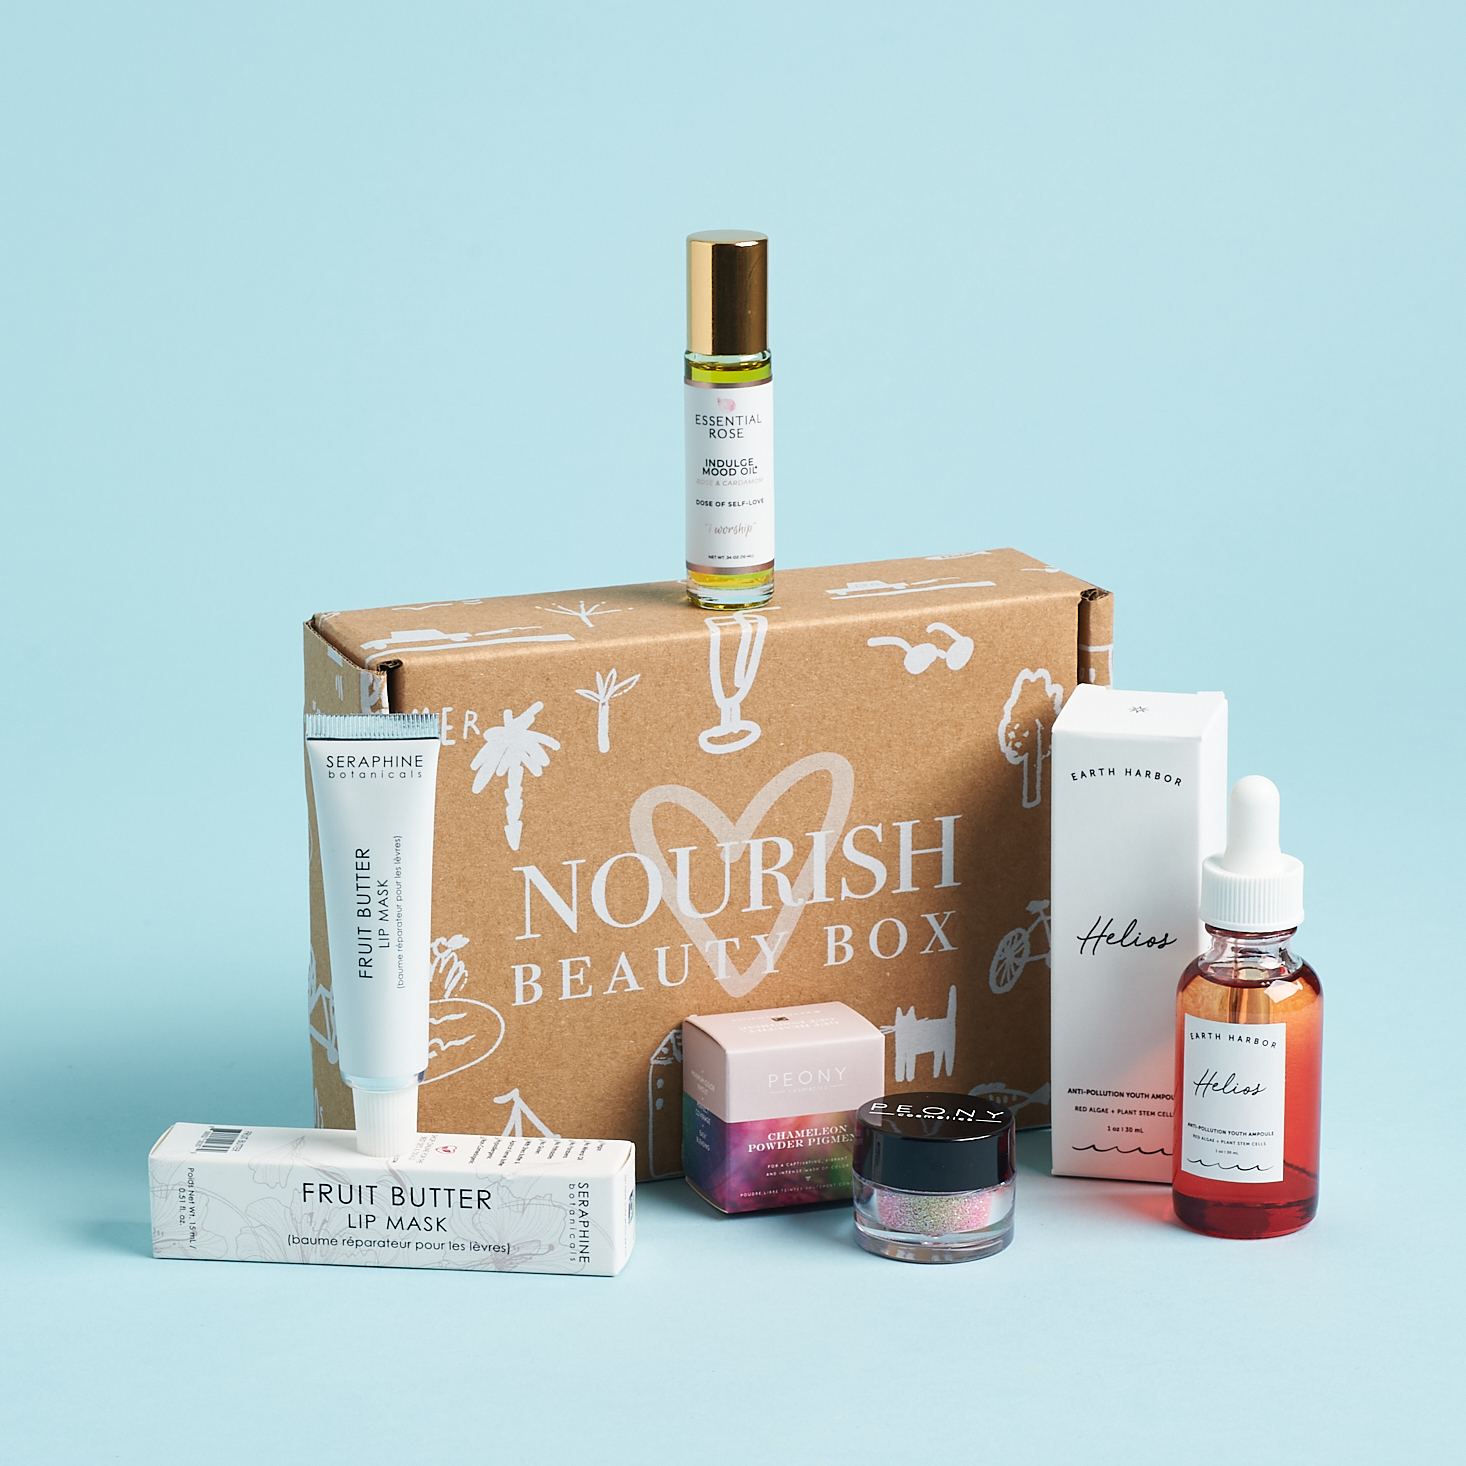 Full Contents for Nourish Beauty Box August 2020